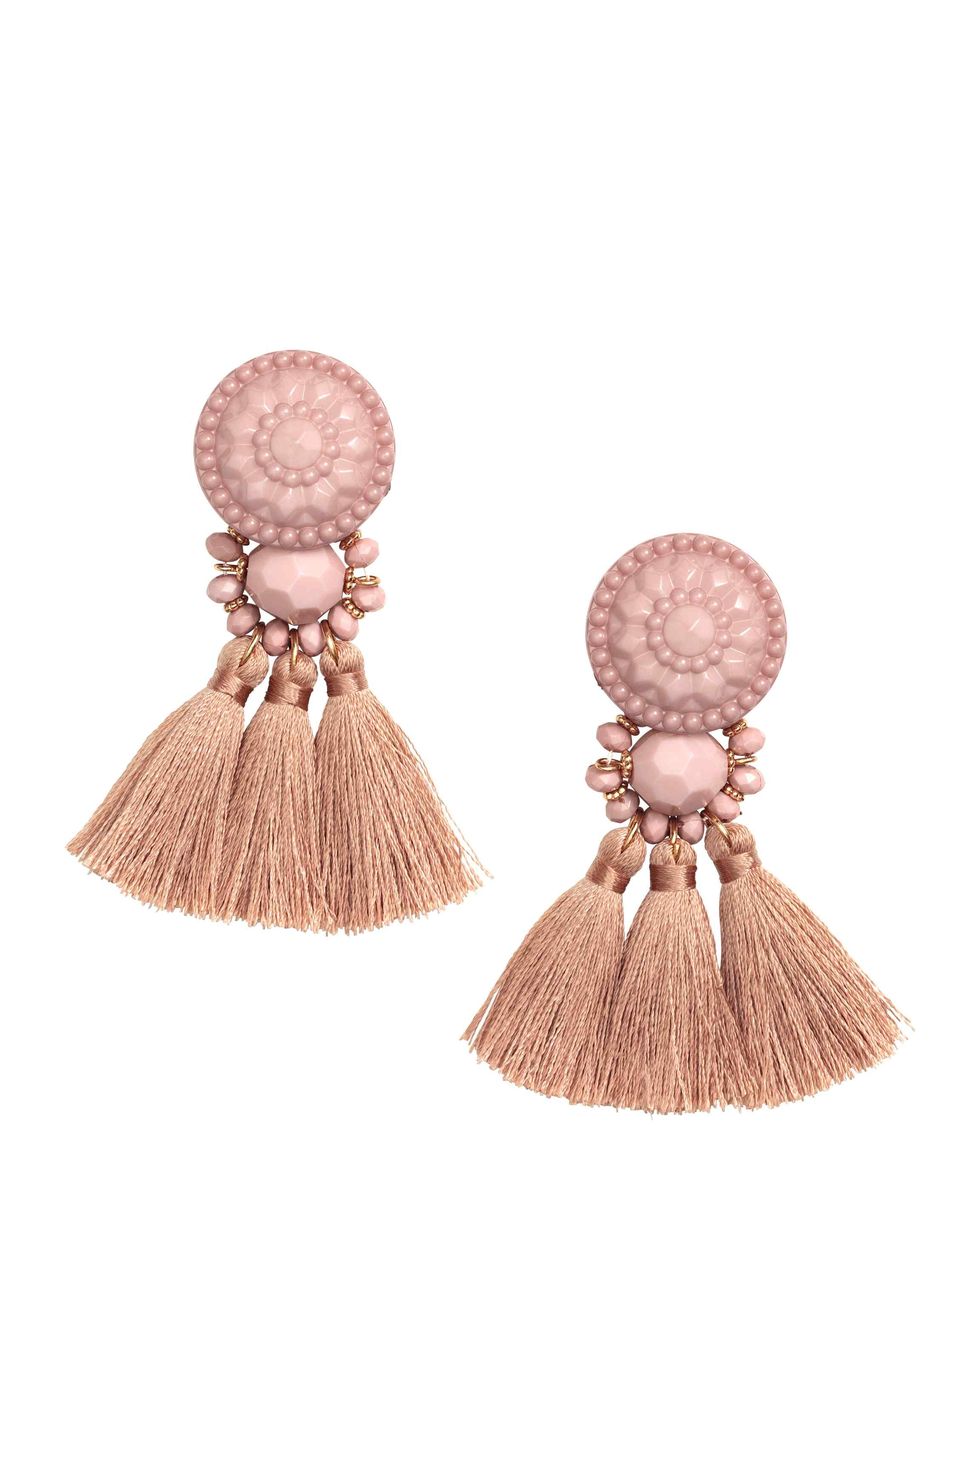 Brown, Pink, Costume accessory, Peach, Earrings, Natural material, Beige, Brush, Fashion design, Hair accessory, 